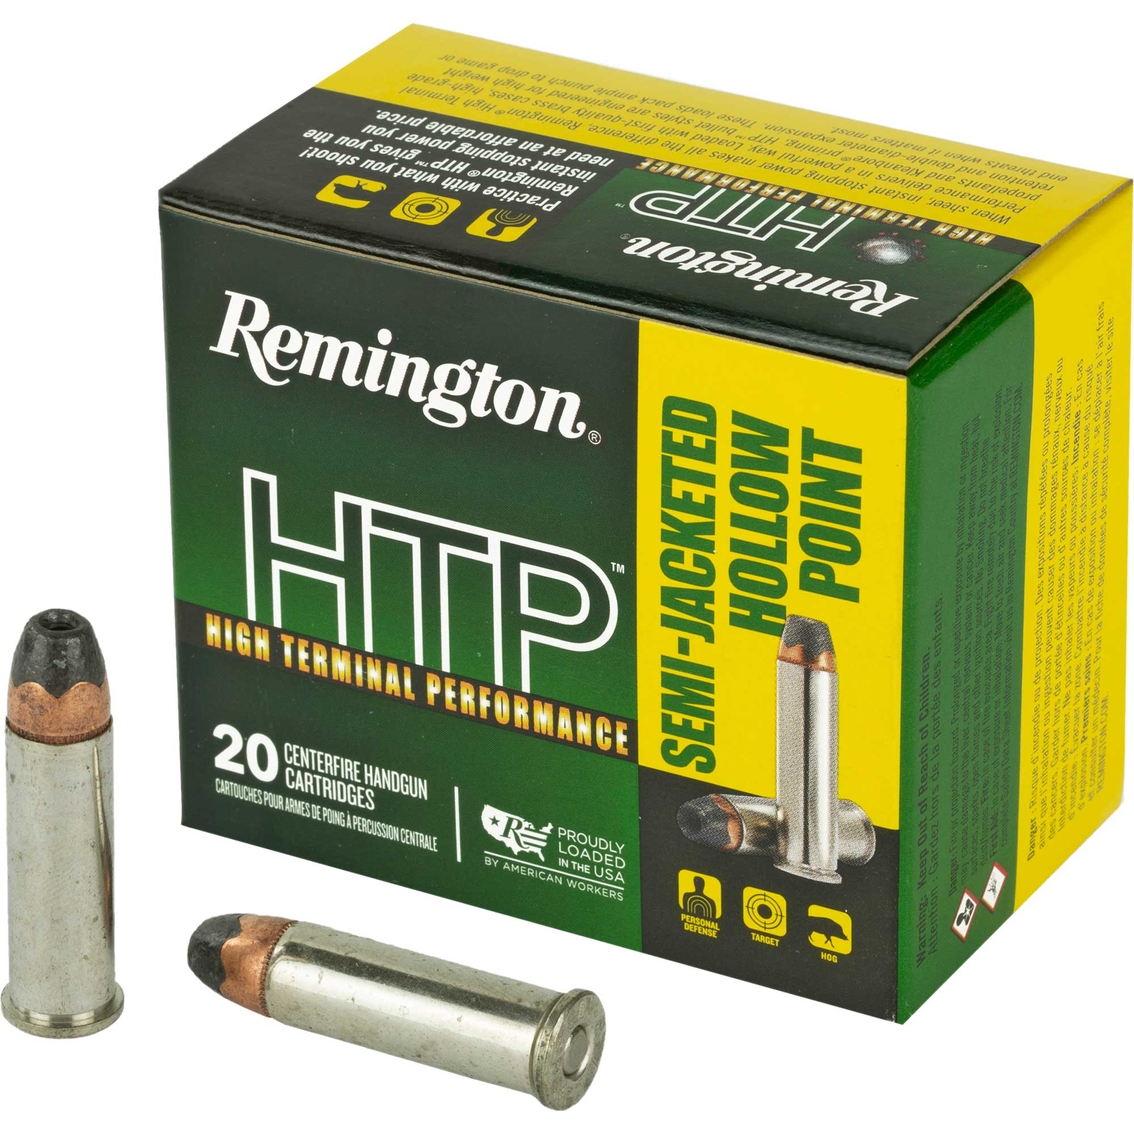 Remington High Terminal Performance .38 Special 125 Gr. Semi-JHP 20 Rounds - Image 4 of 4